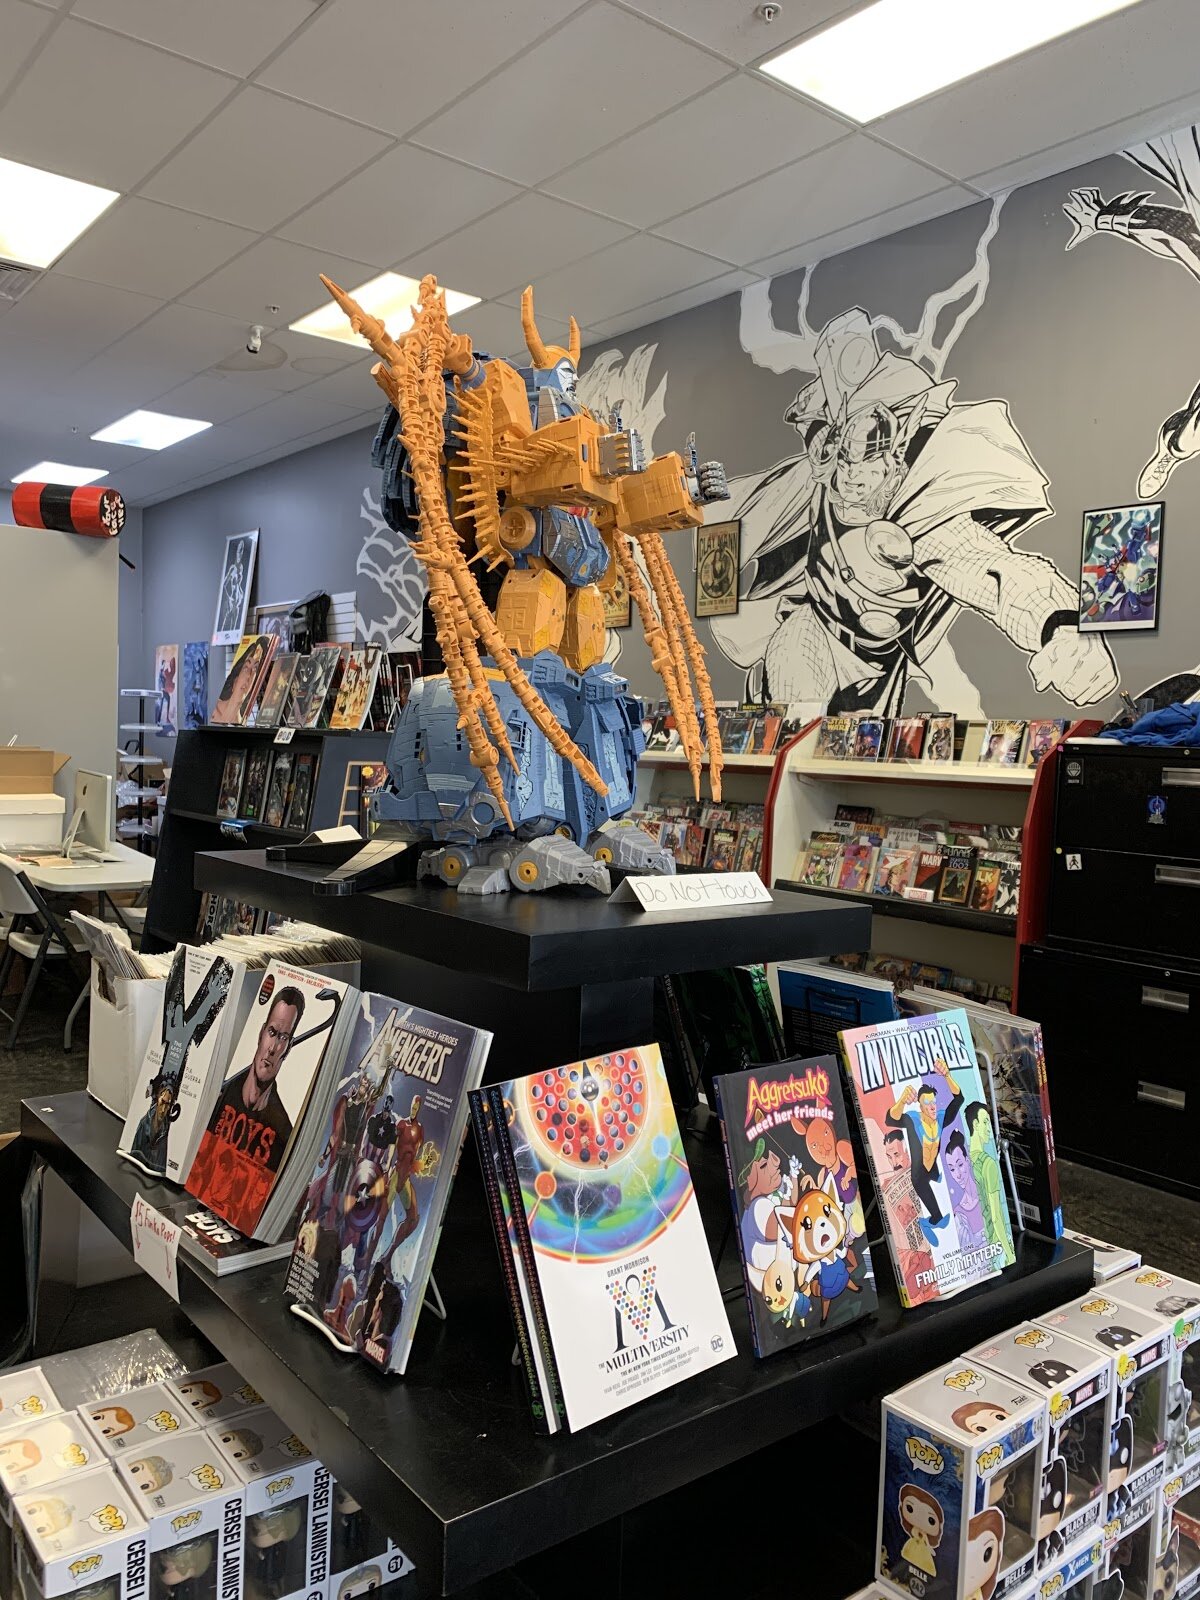 Large robotic figure stands over display of graphic novels